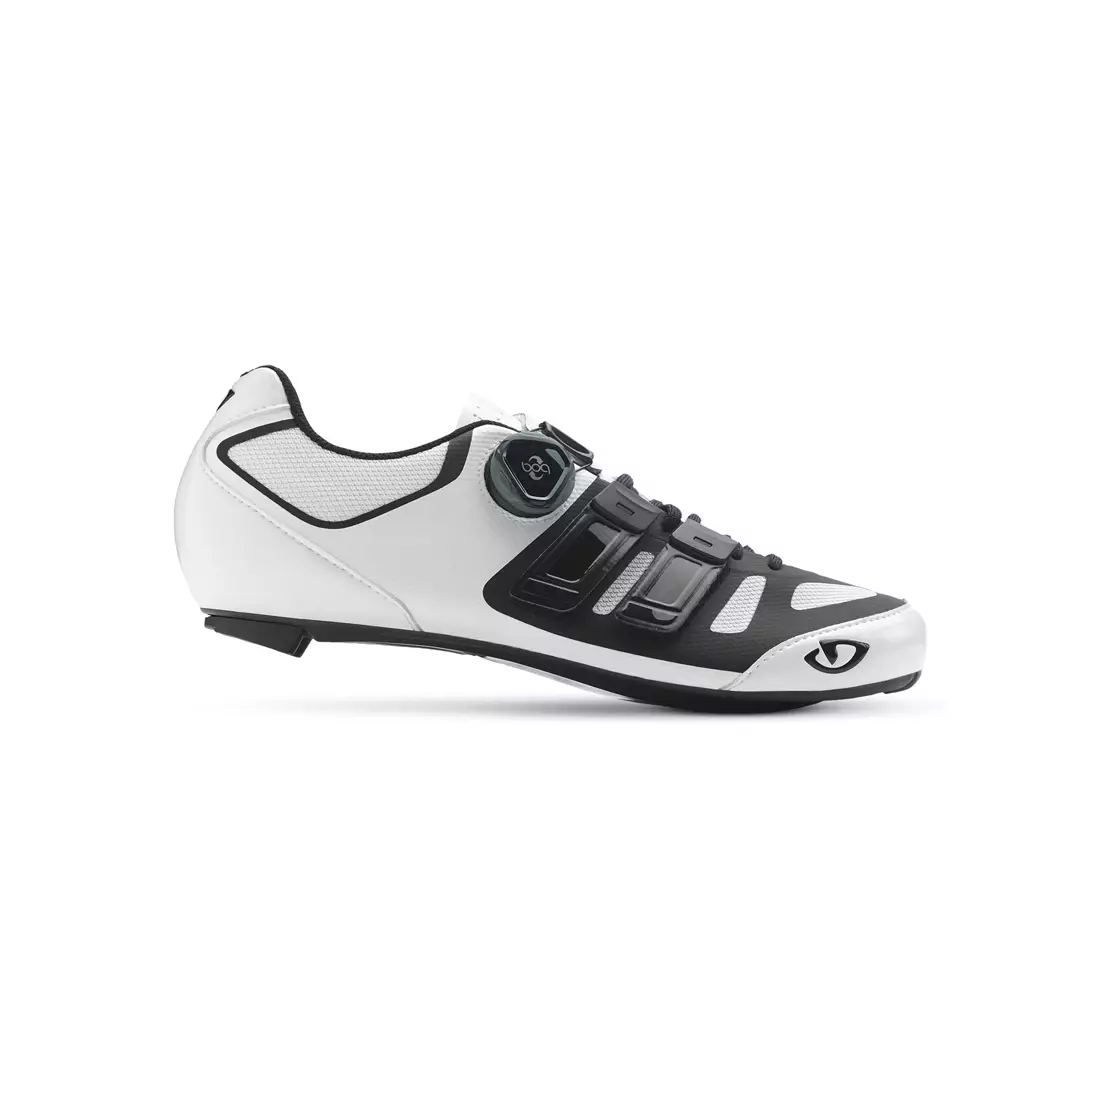 Men's bicycle boots  GIRO SENTRIE TECHLACE white